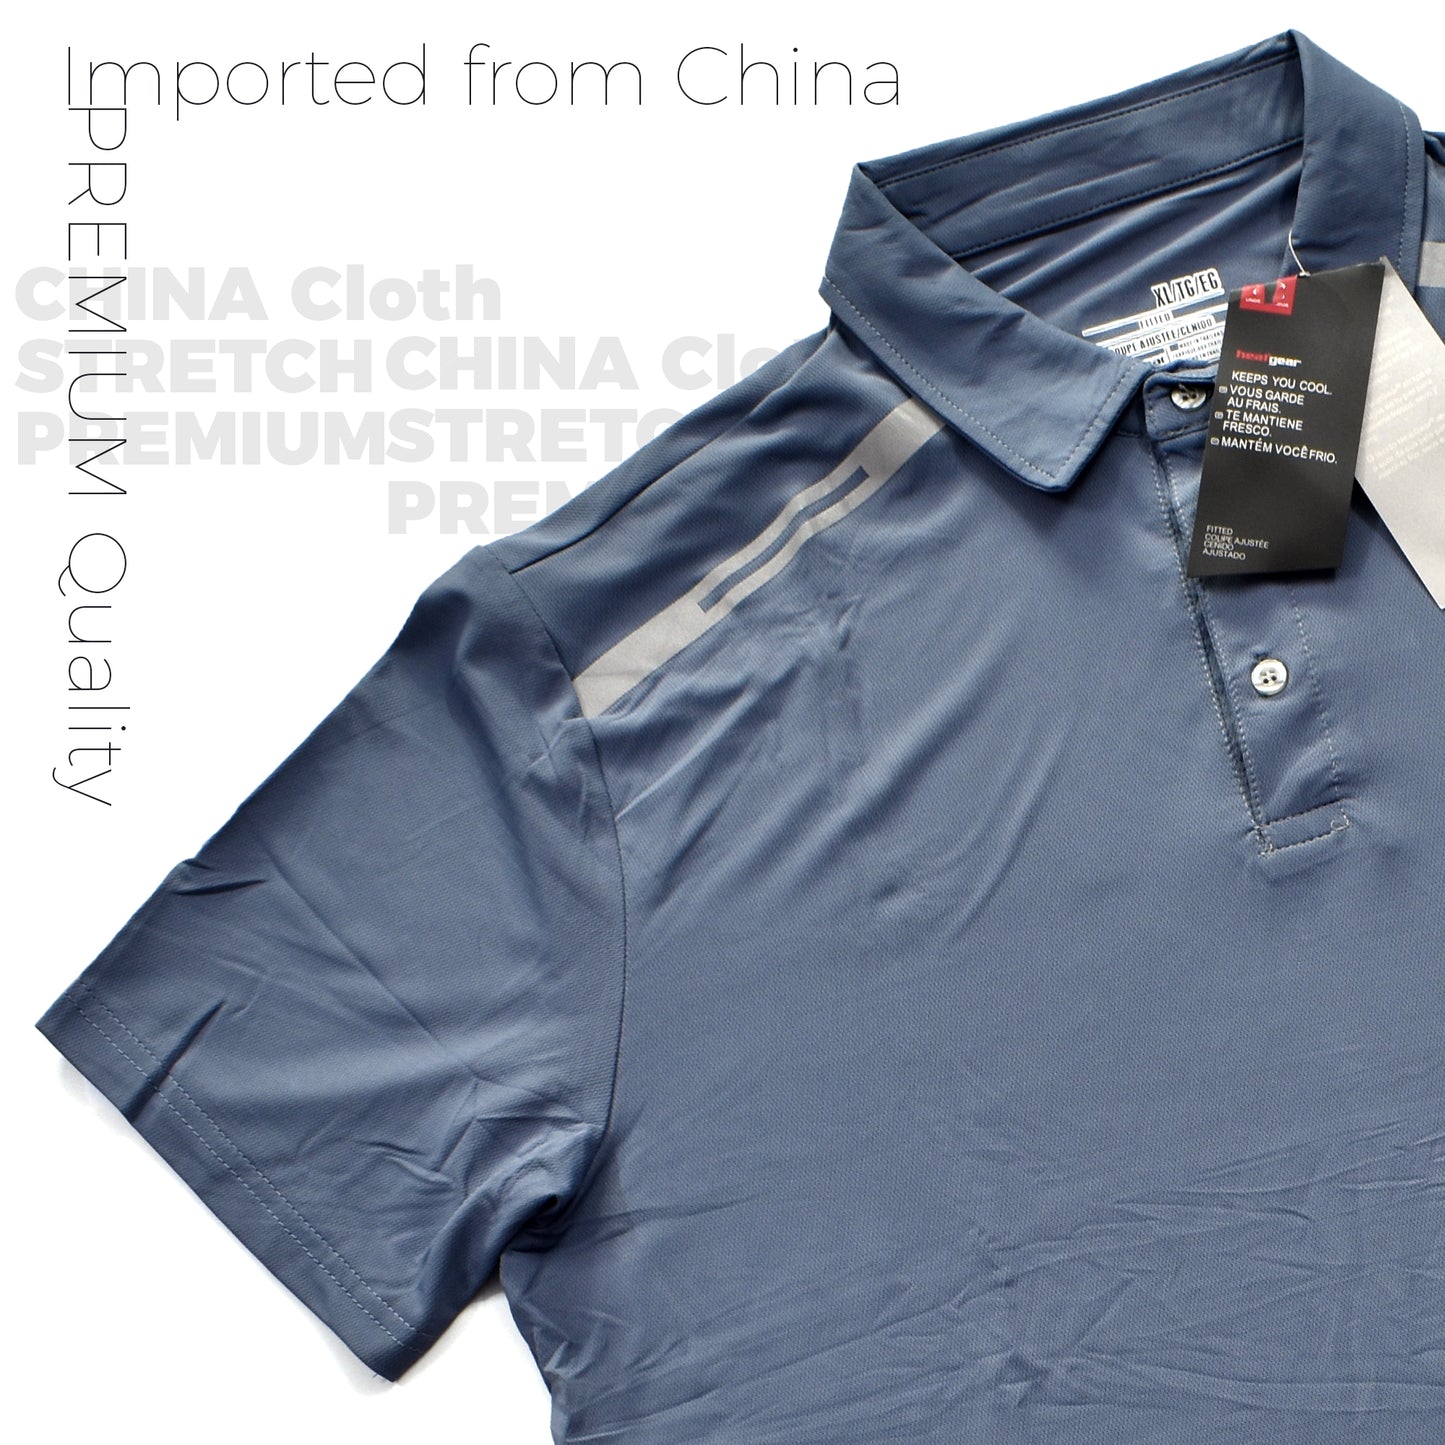 Premium Quality Stitch China T-Shirt 17 | Extreme Comfort - Imported from China